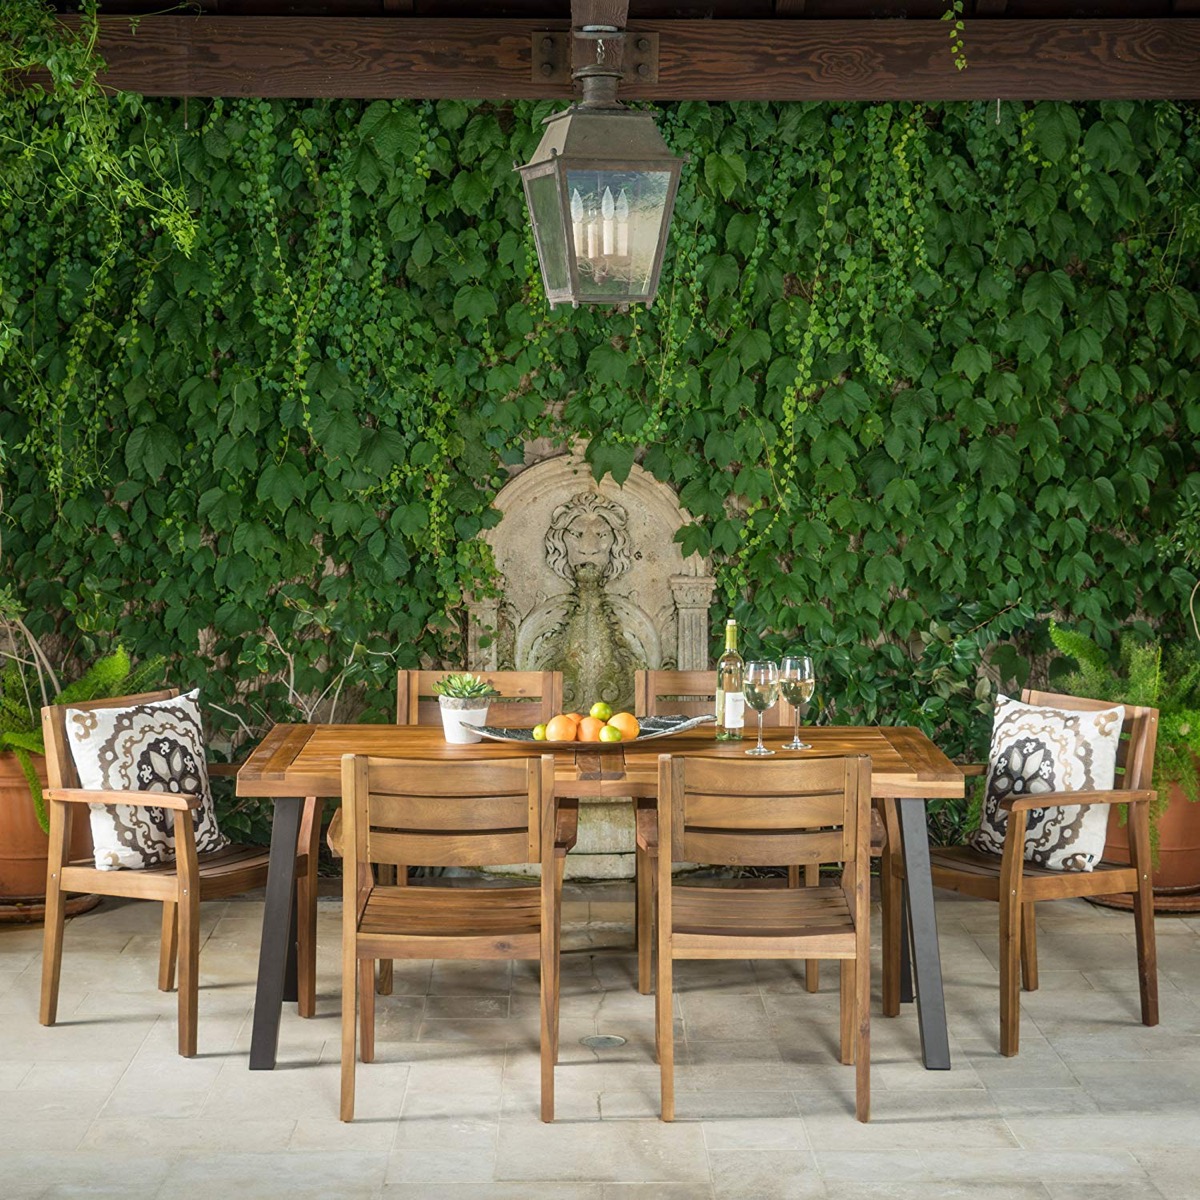 Rustic Outdoor Dining Table And Chairs, Rustic Outdoor Patio Table And Chairs